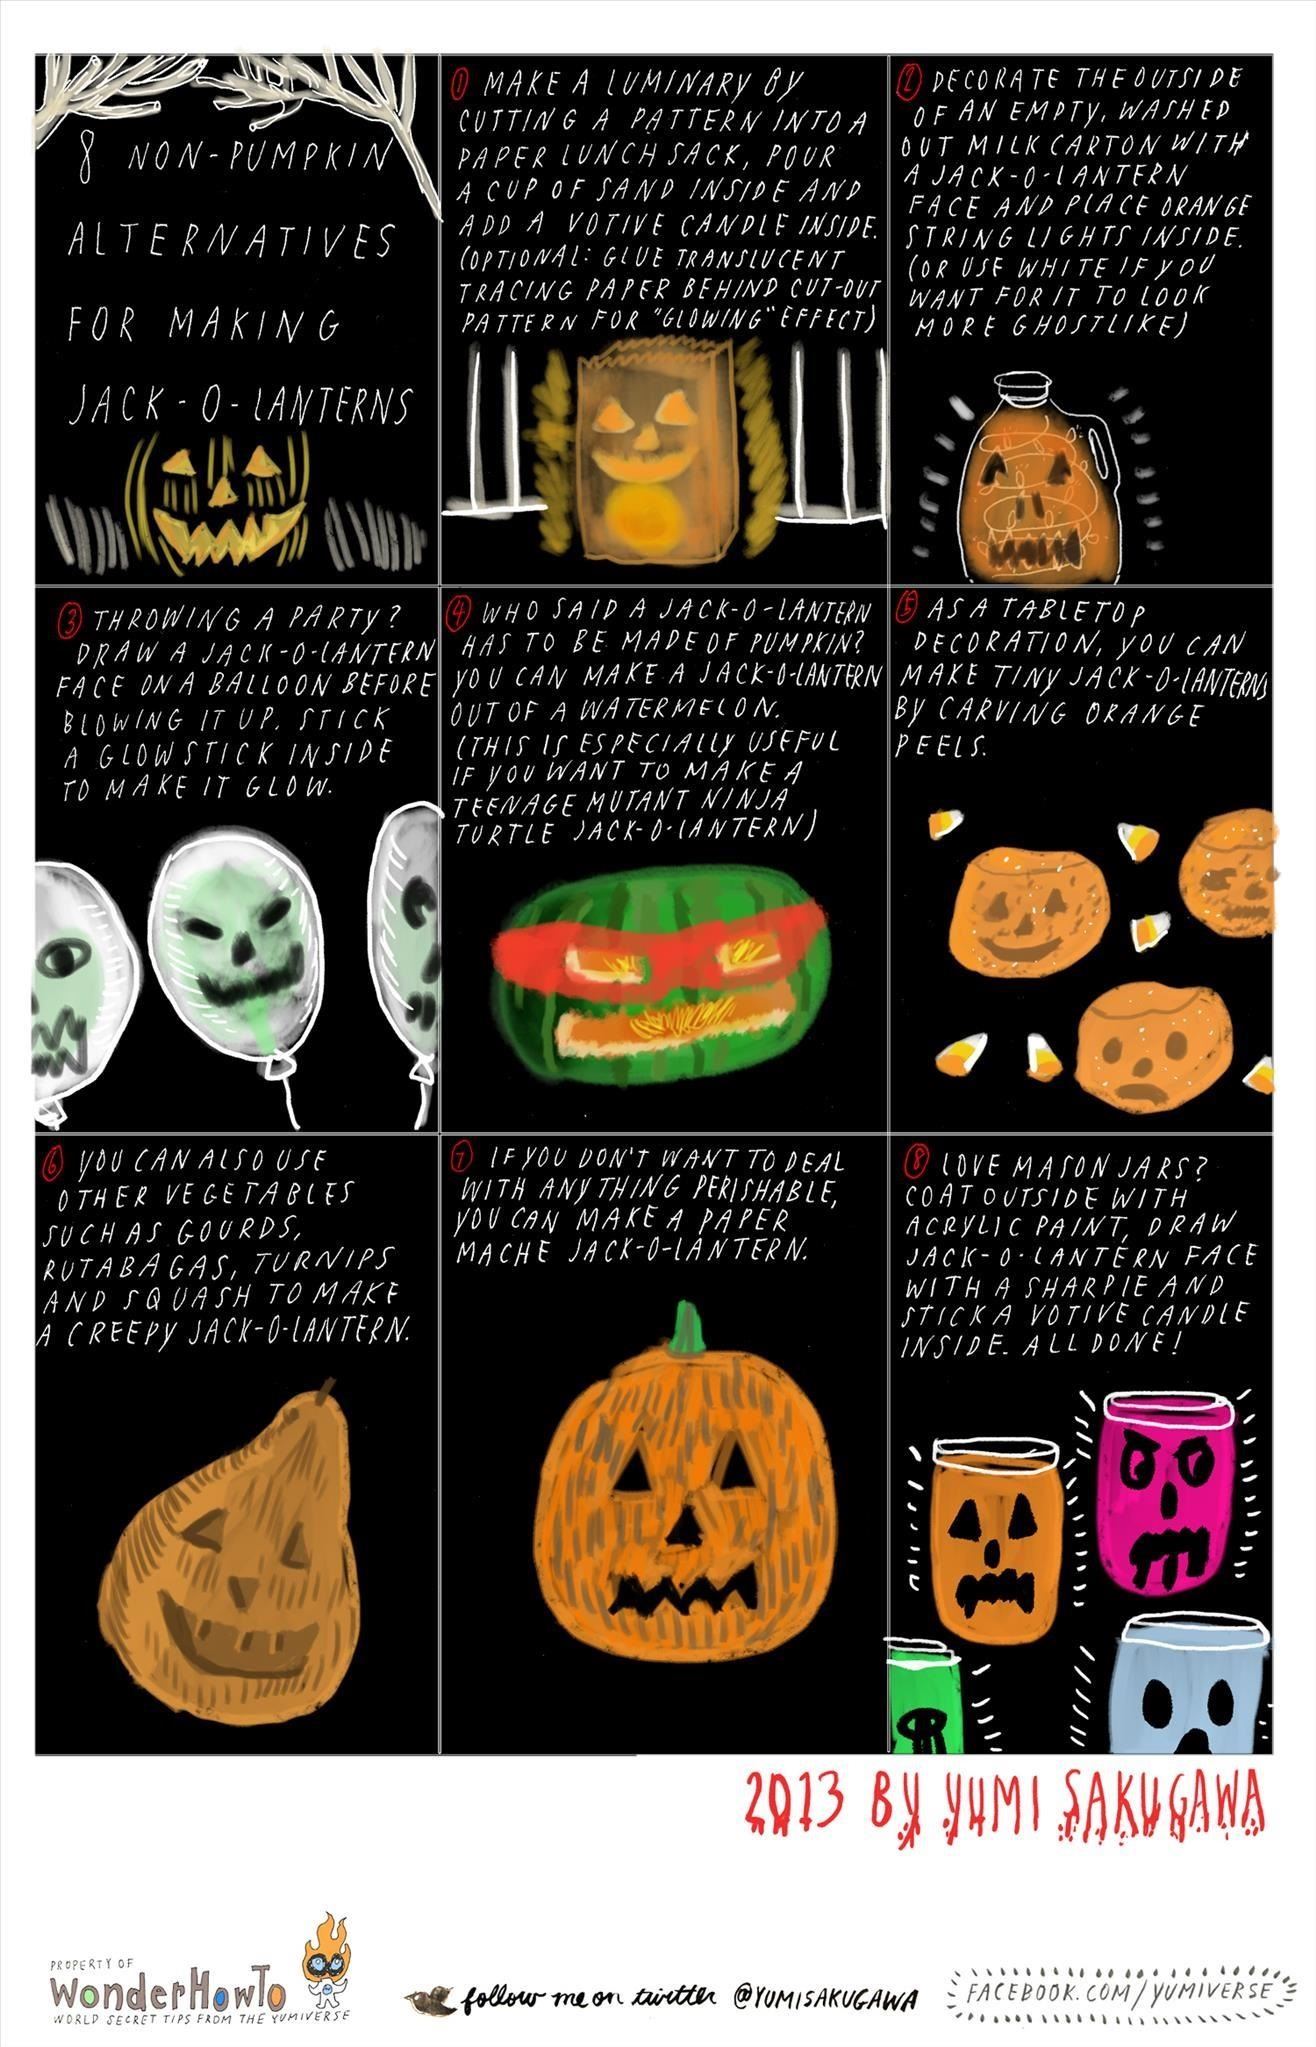 How to Make Spooky, Last-Minute Jack-O'-Lanterns for Halloween Without Any Pumpkins